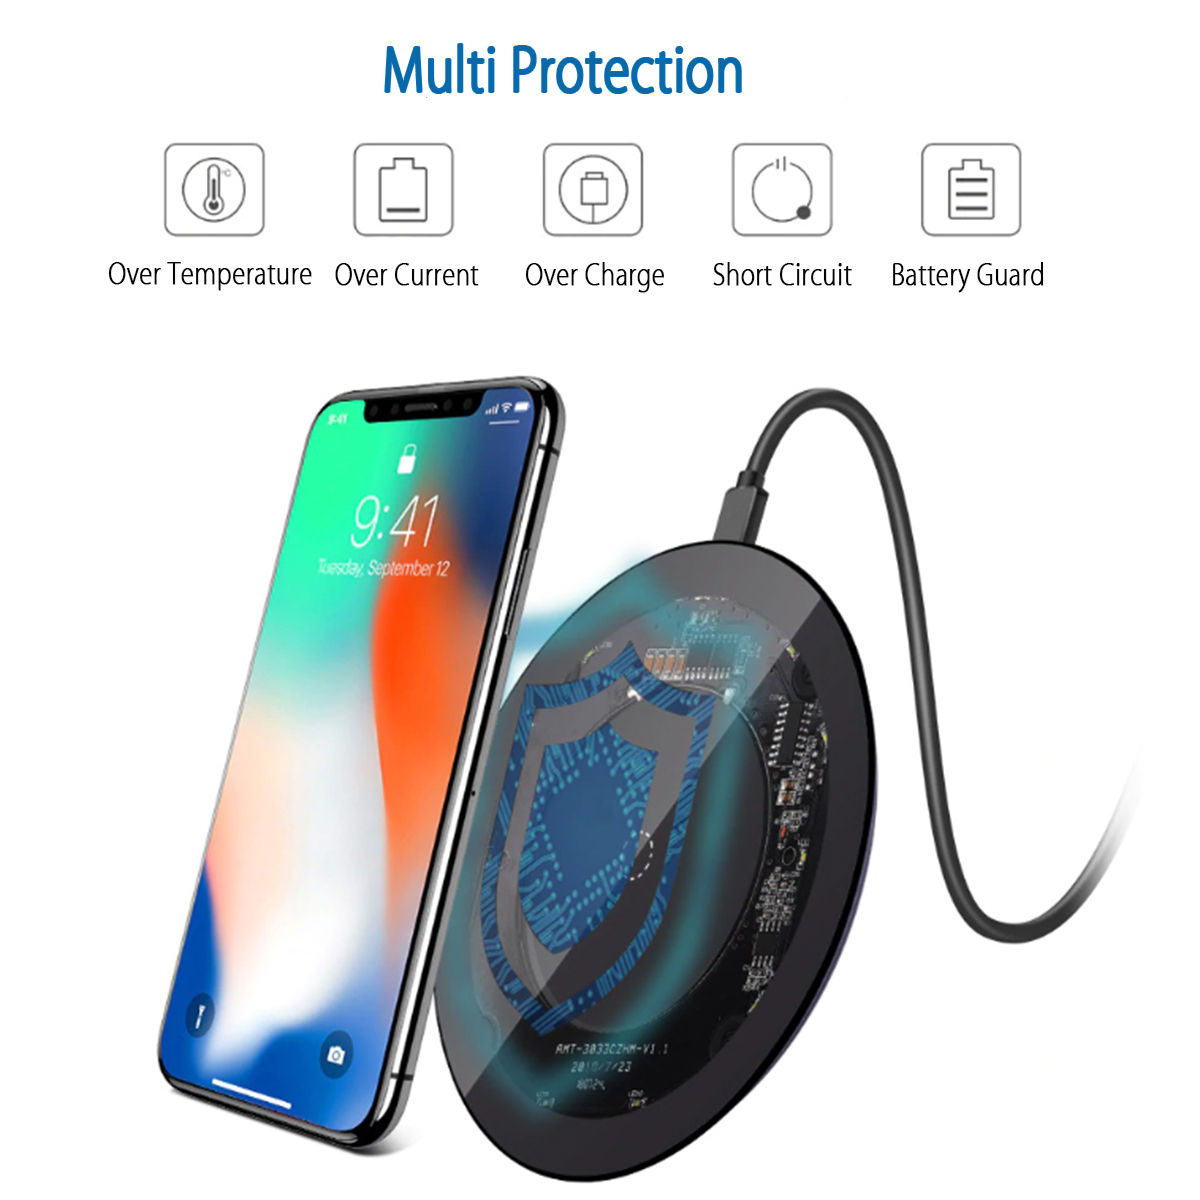 DC-5V-10W-QI-Fast-Wireless-Charger-Acrylic-Transparent-Pad-For-iPhone-Xs-Max-X-Samsung-S9-1444037-1